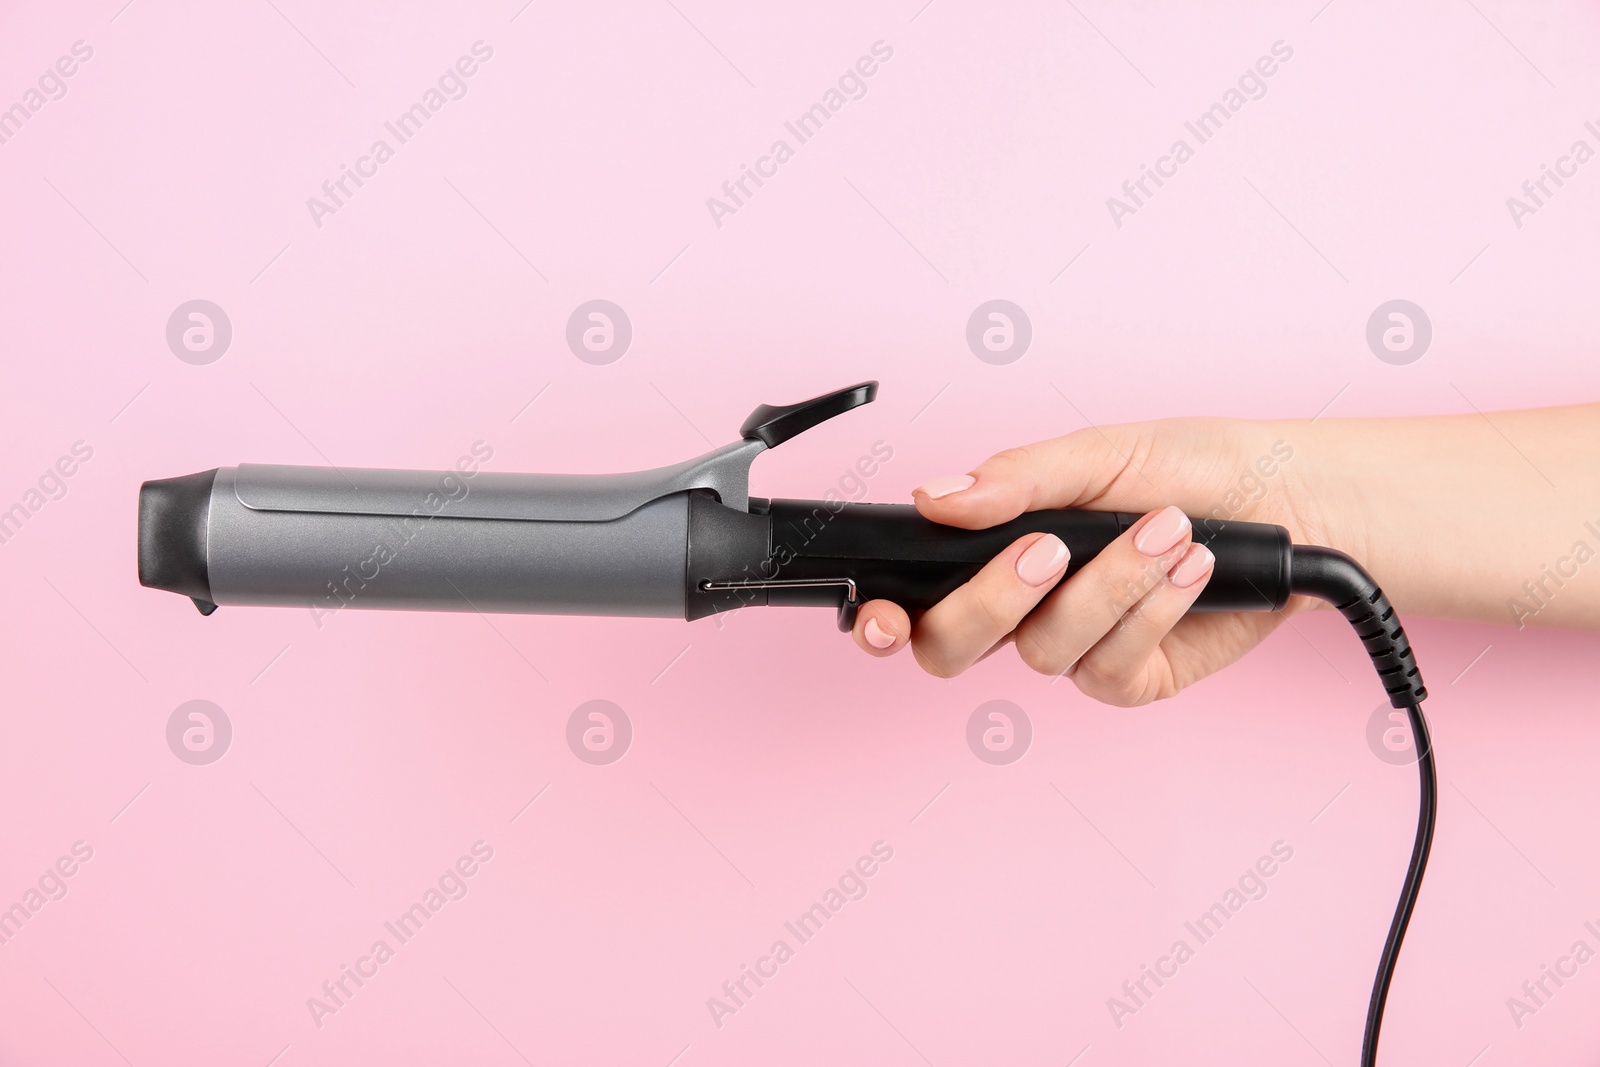 Photo of Hair styling appliance. Woman holding curling iron on pink background, closeup